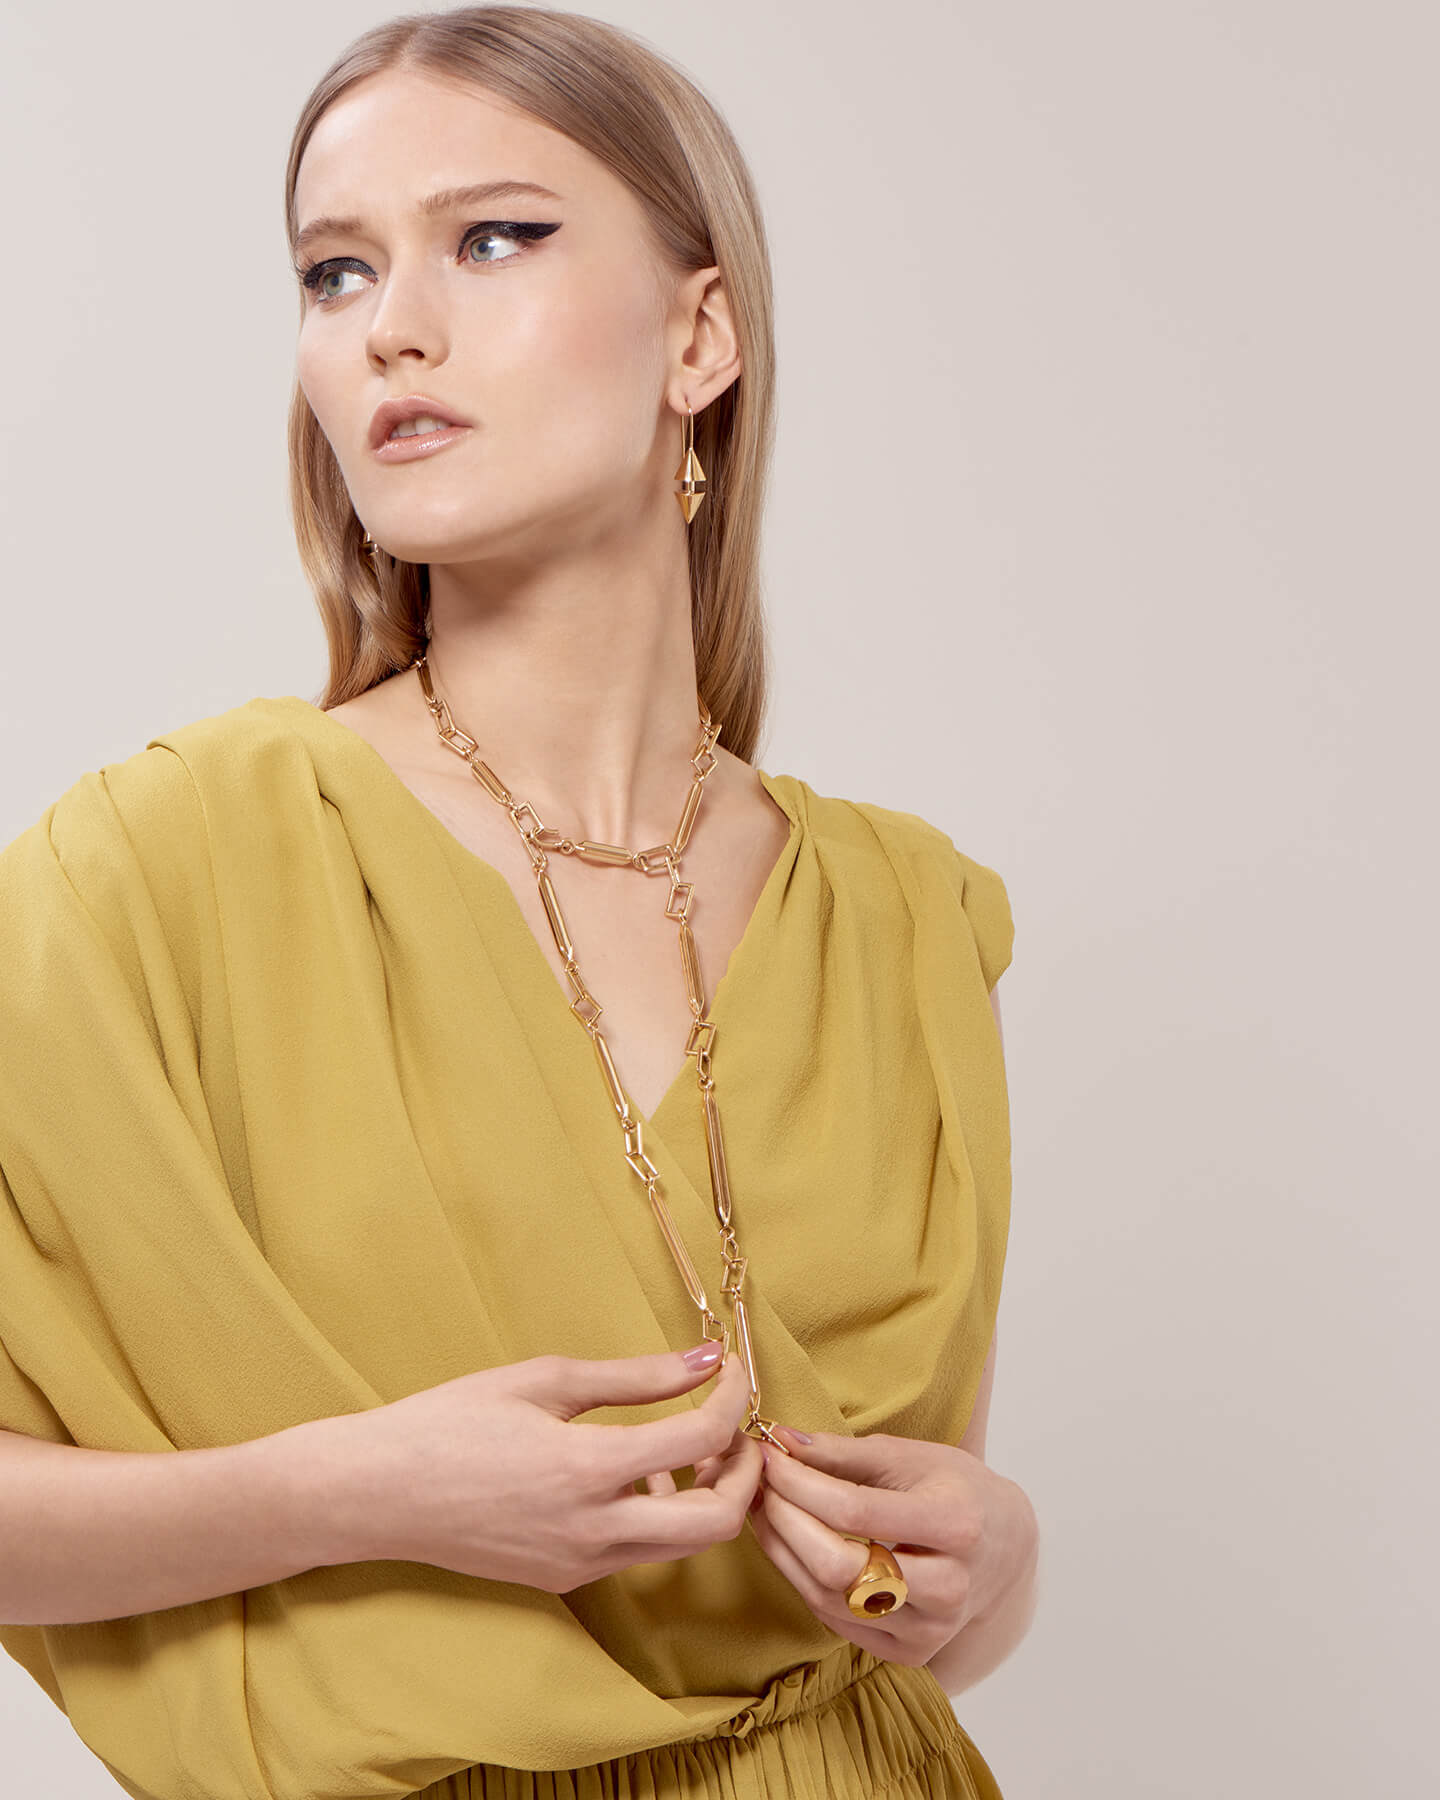 Auvere Golden Geometry I Look Book 22 and 24 karat gold jewelry